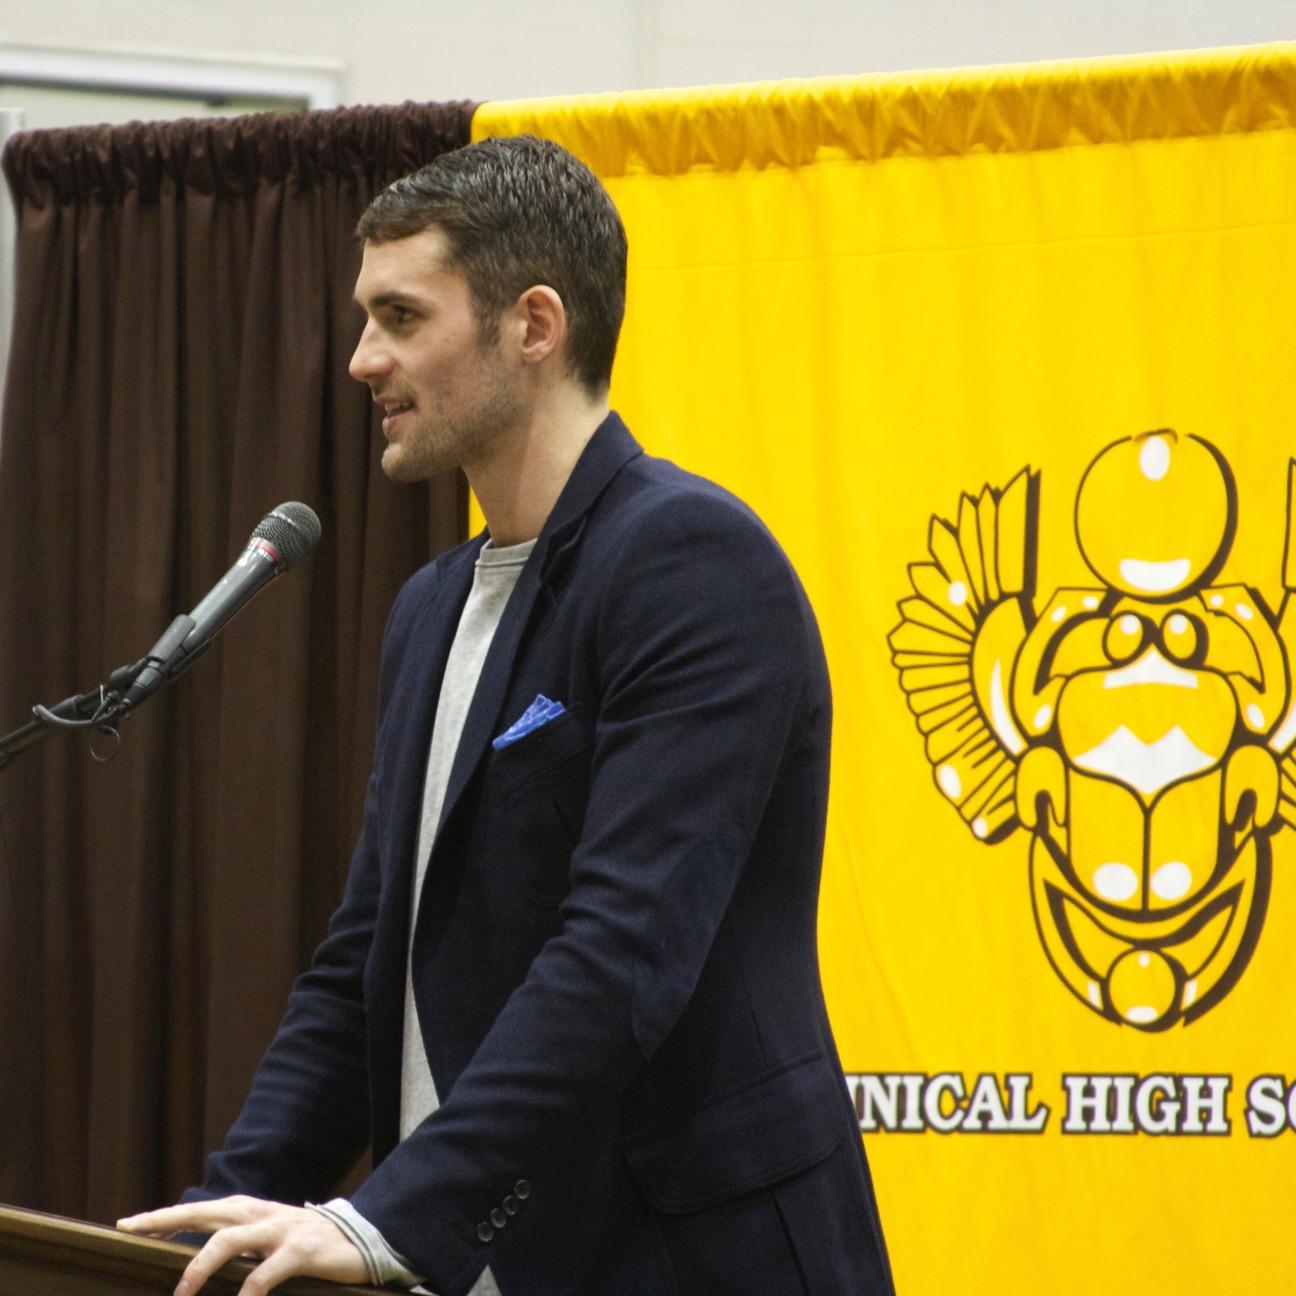 A partnership between Cleveland Cavalier Kevin Love and unite4:good to inspire acts of kindness and volunteerism among East Tech HS students.